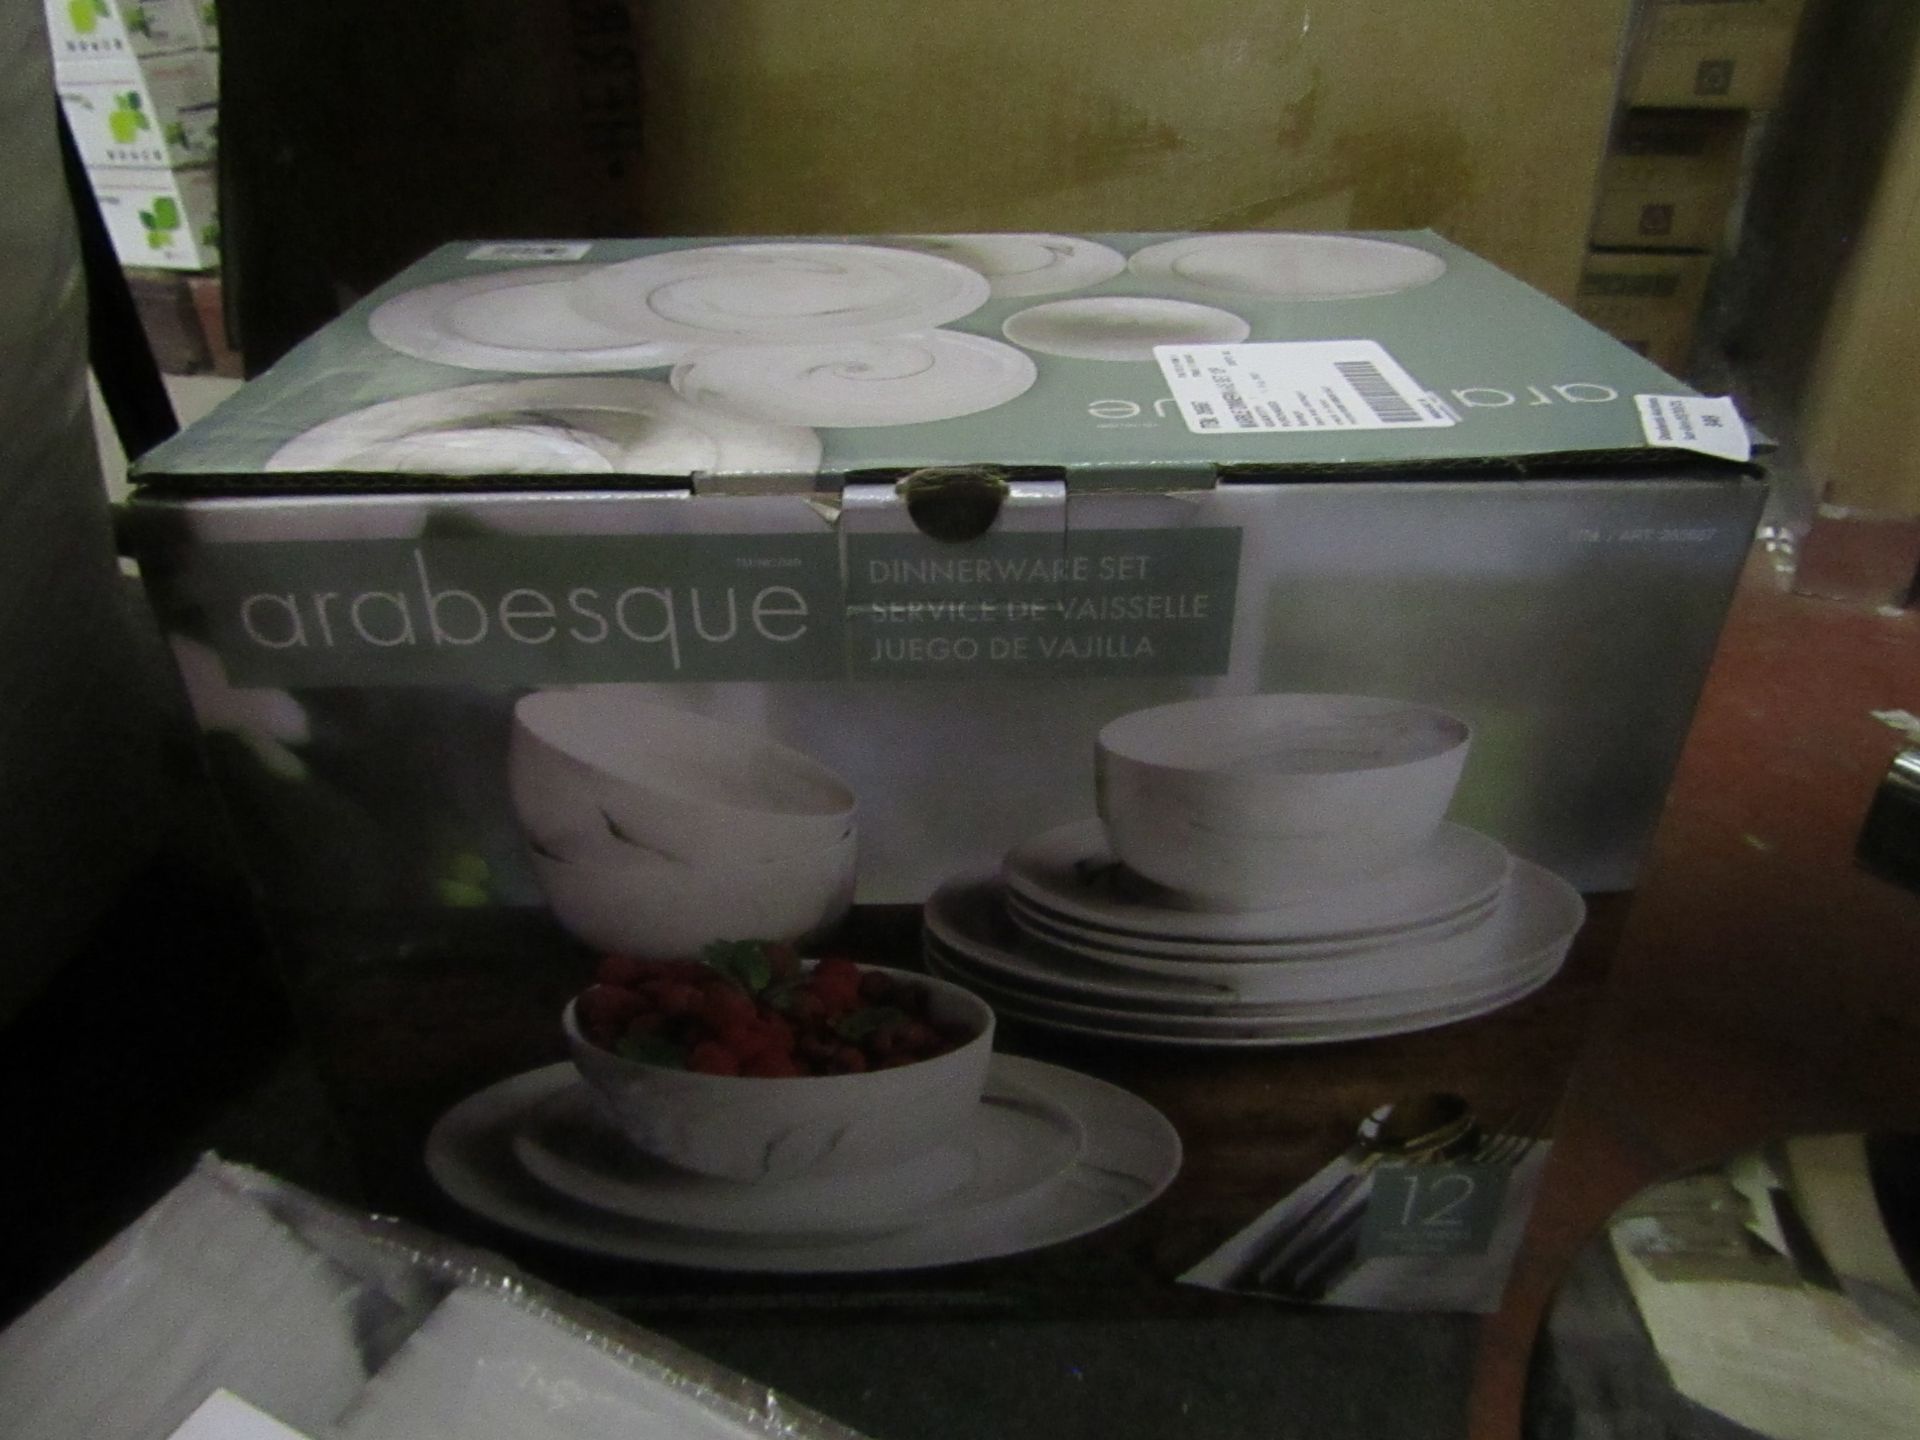 Arabesque 12 Piece Dinner Ware Set - One Bowl Has A small Chip & Boxed - RRP £34.